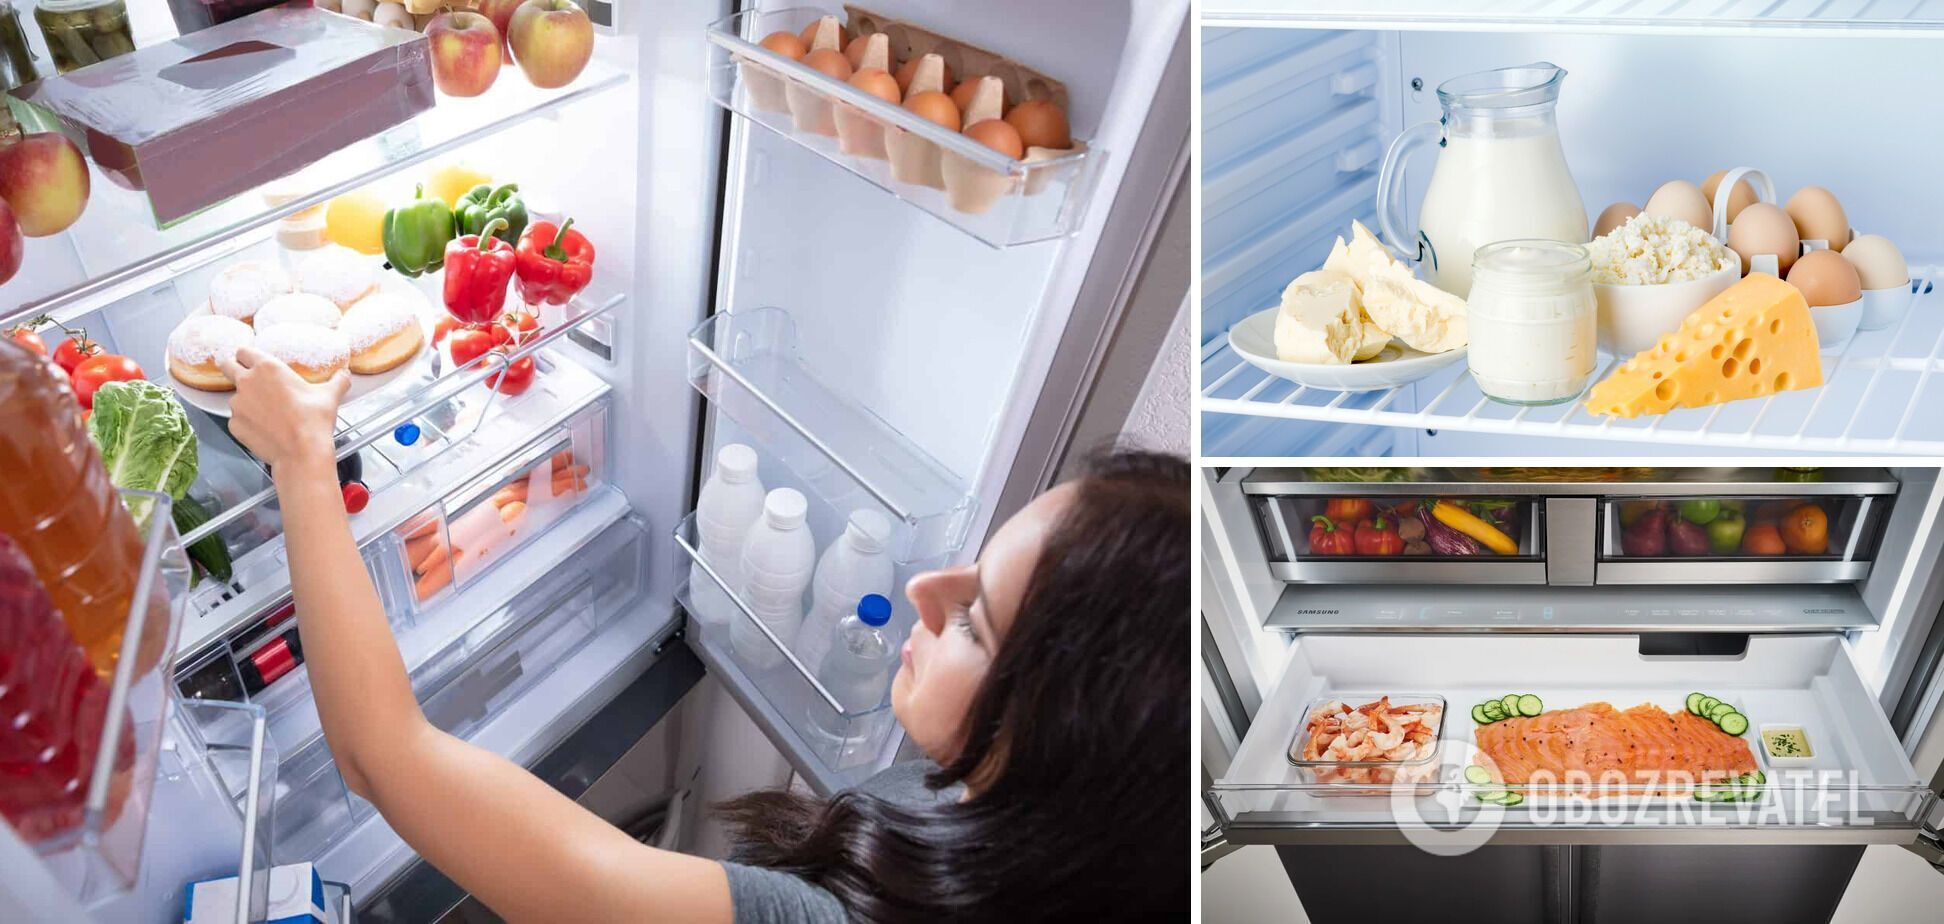 Three foods that should not be stored in the refrigerator door: they will spoil much faster